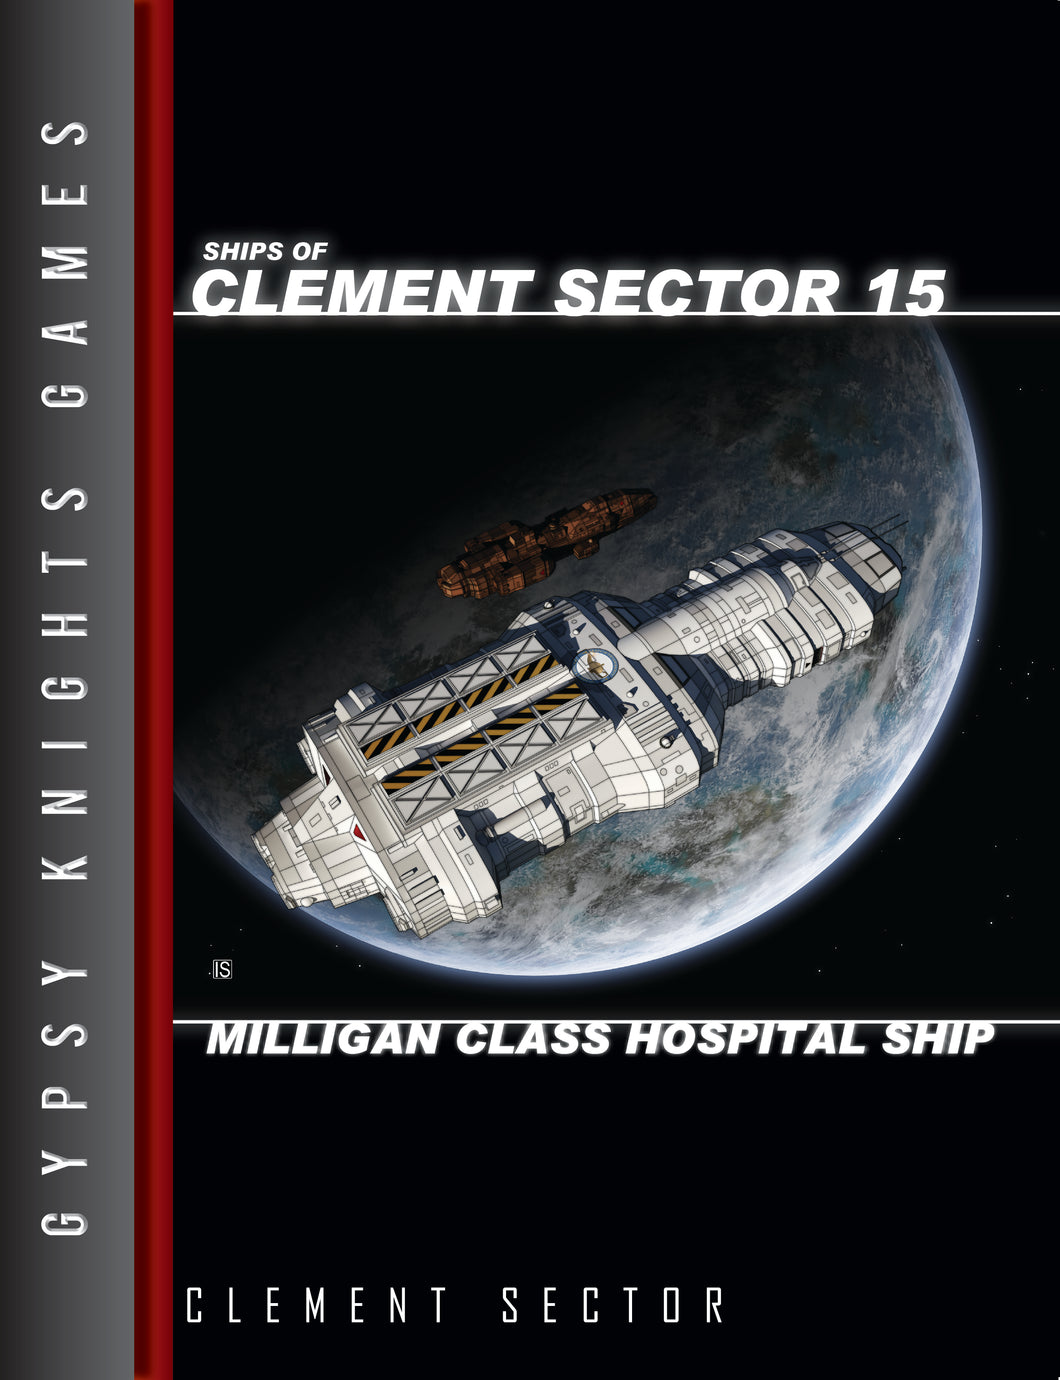 Ships of Clement Sector 15: Milligan-class Hospital Ship PDF